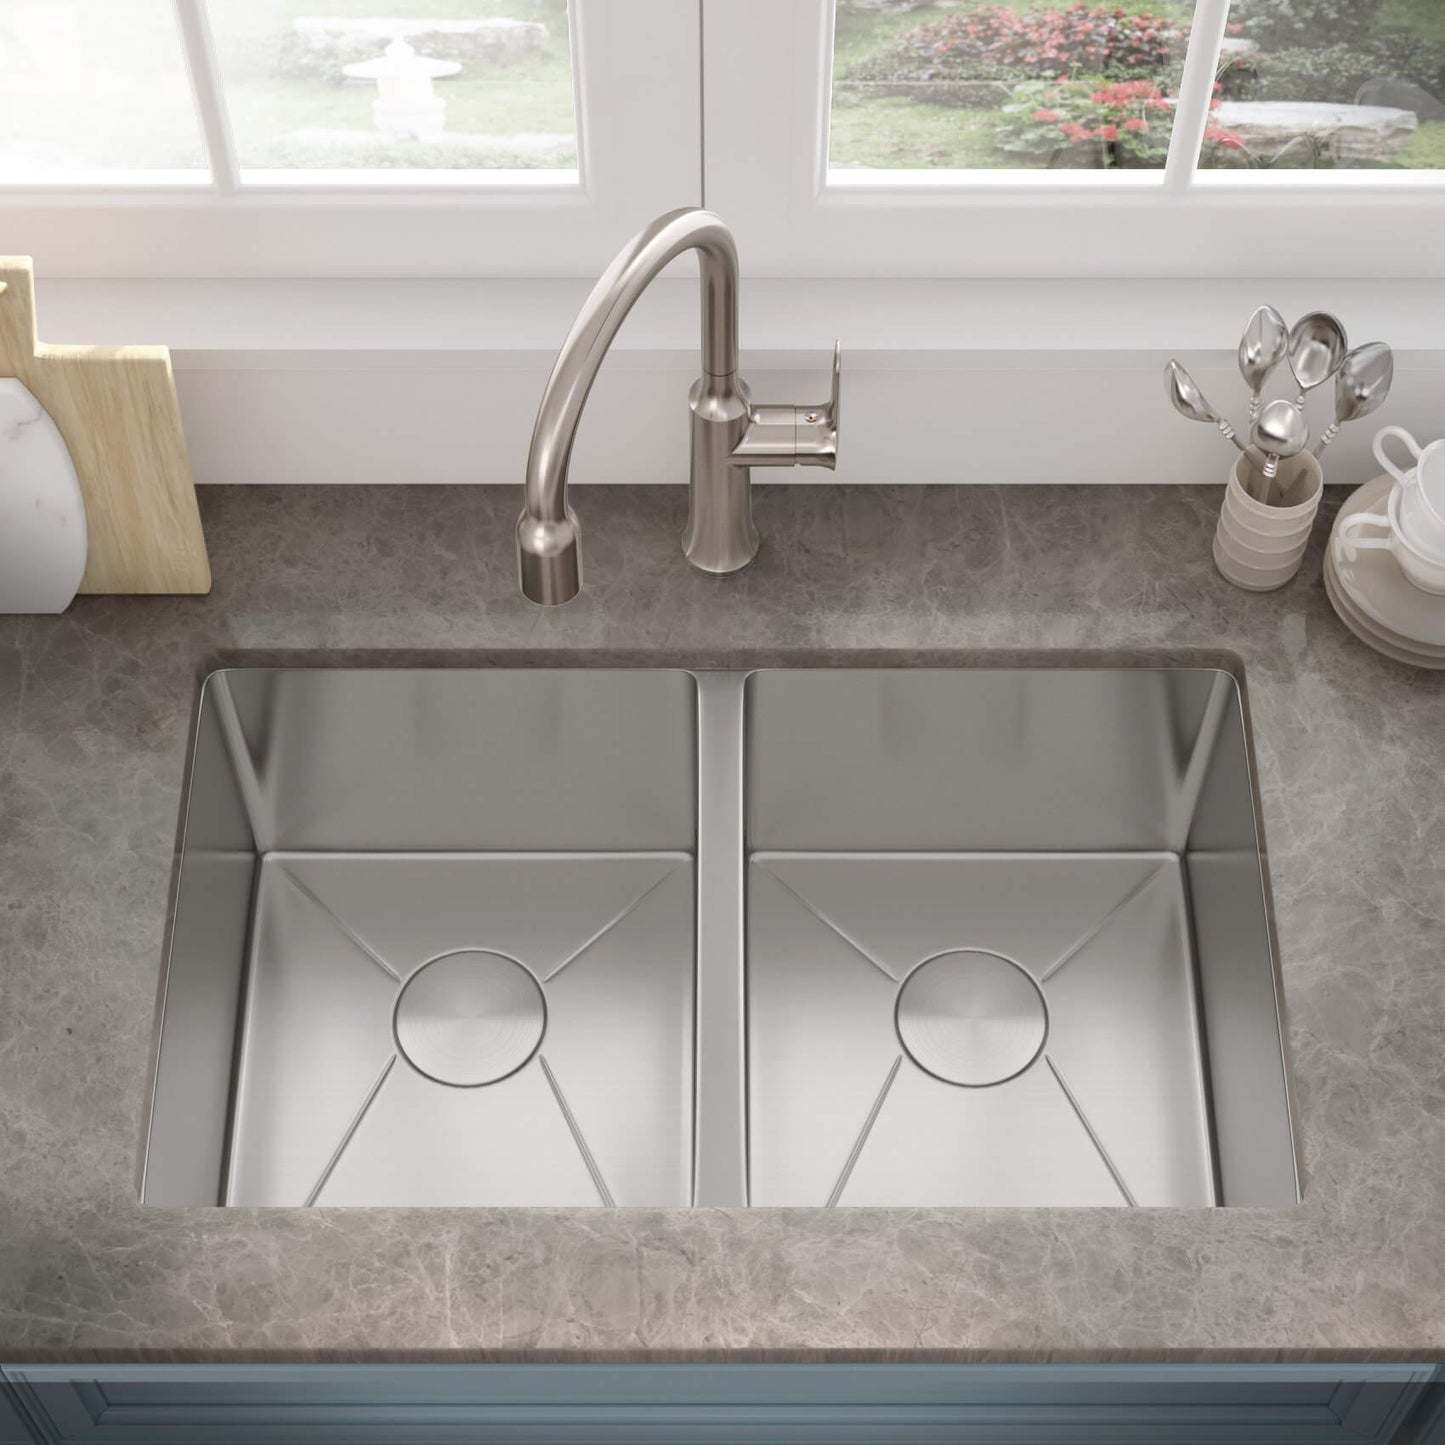 Double Bowl ADA Kitchen Sink is mounted over kitchen faucet